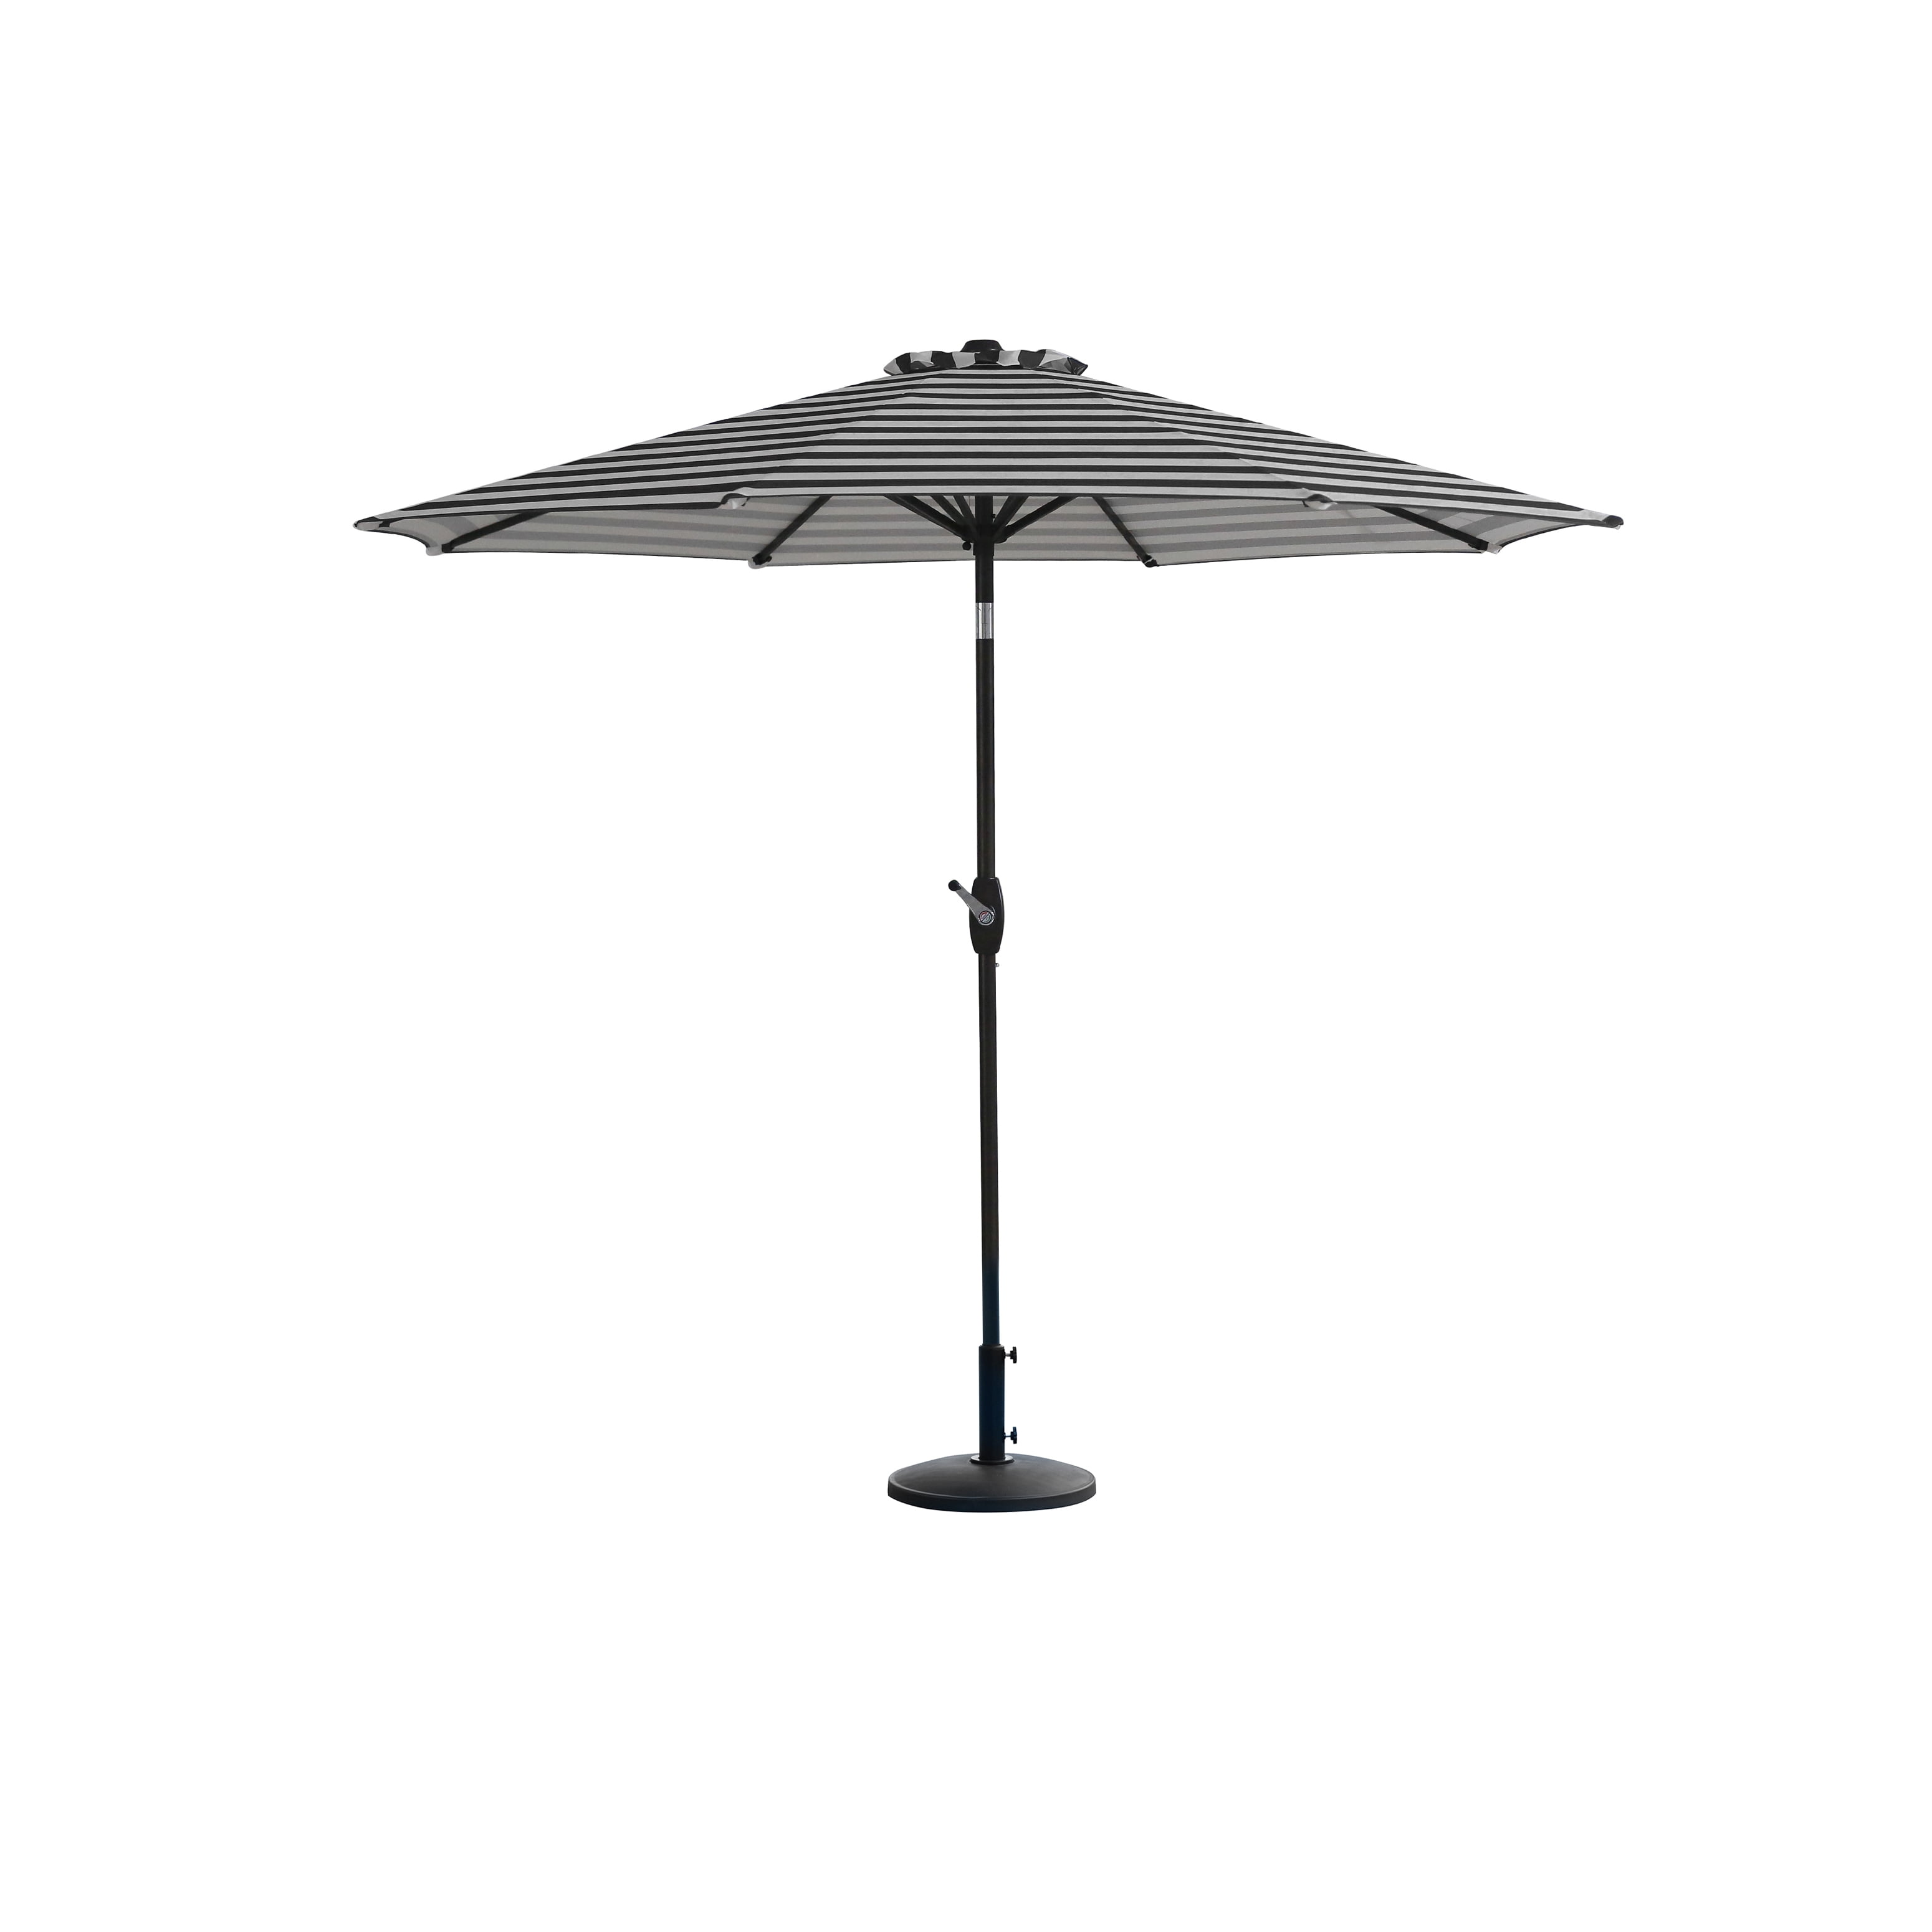 Outdoor Detachable Patio Umbrella Base Weight Bag Round with Large Opening 6L 